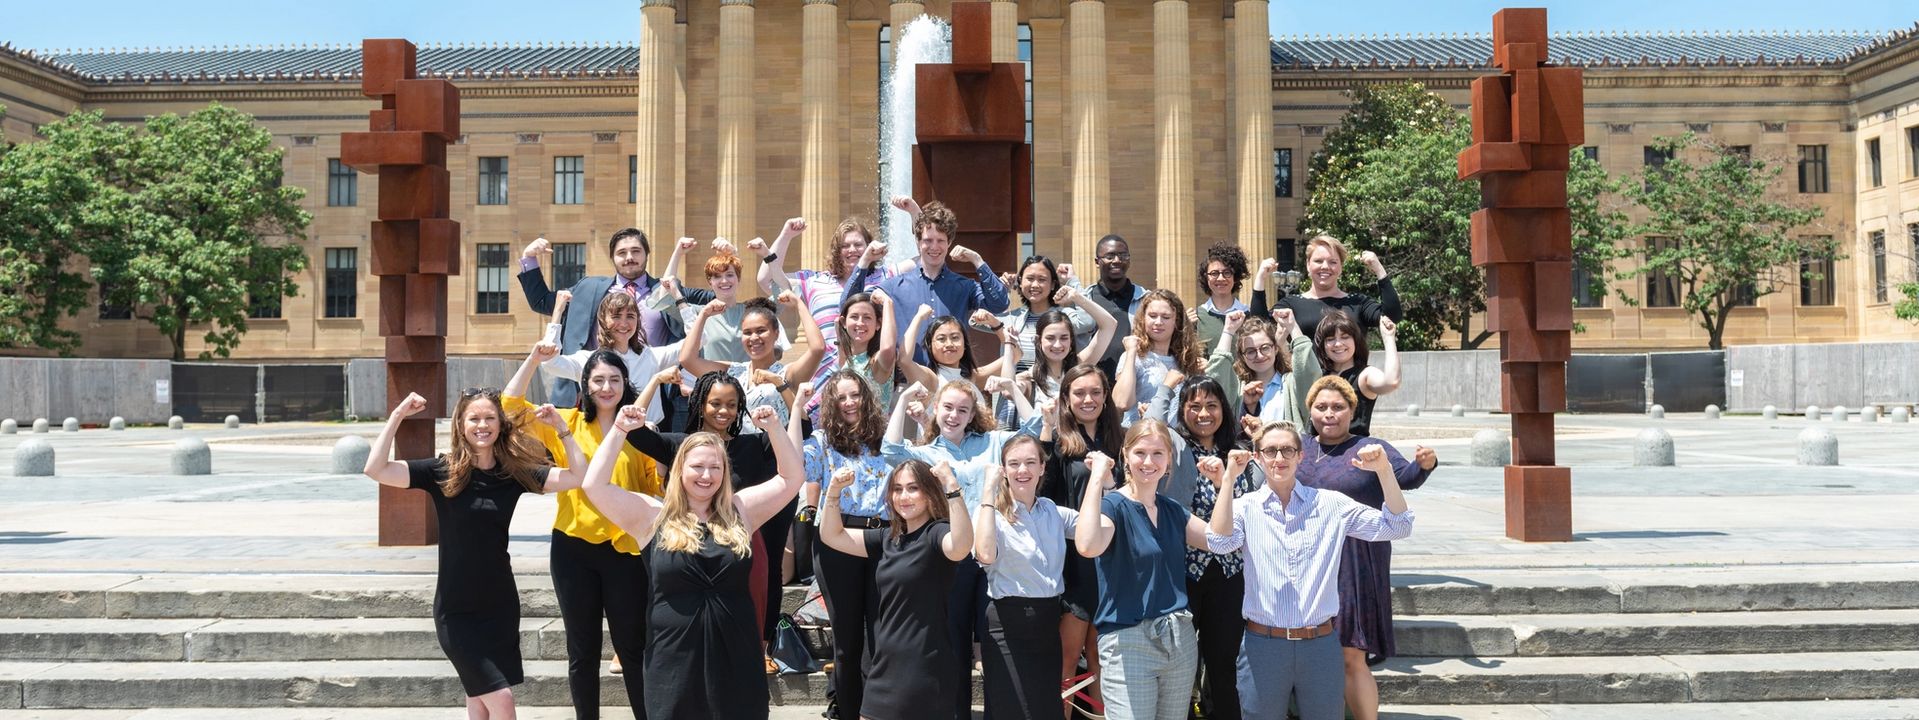 A group of interns doing the Rocky pose on the Rocky steps in front of the museum